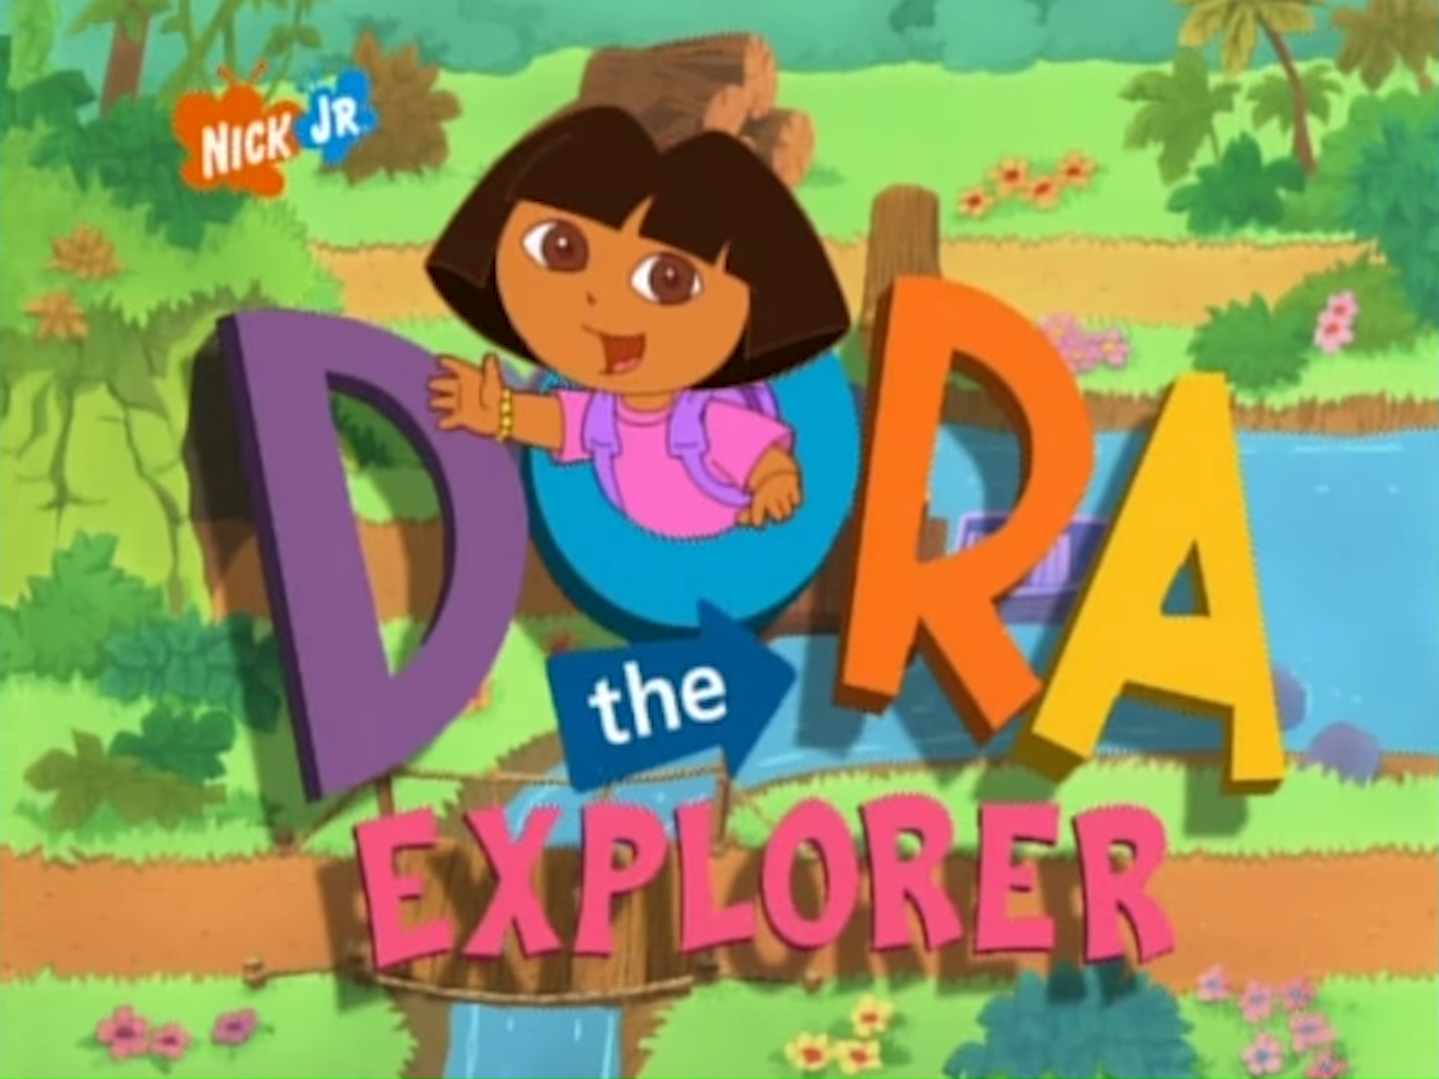 dora the explorer city of lost toys vhs